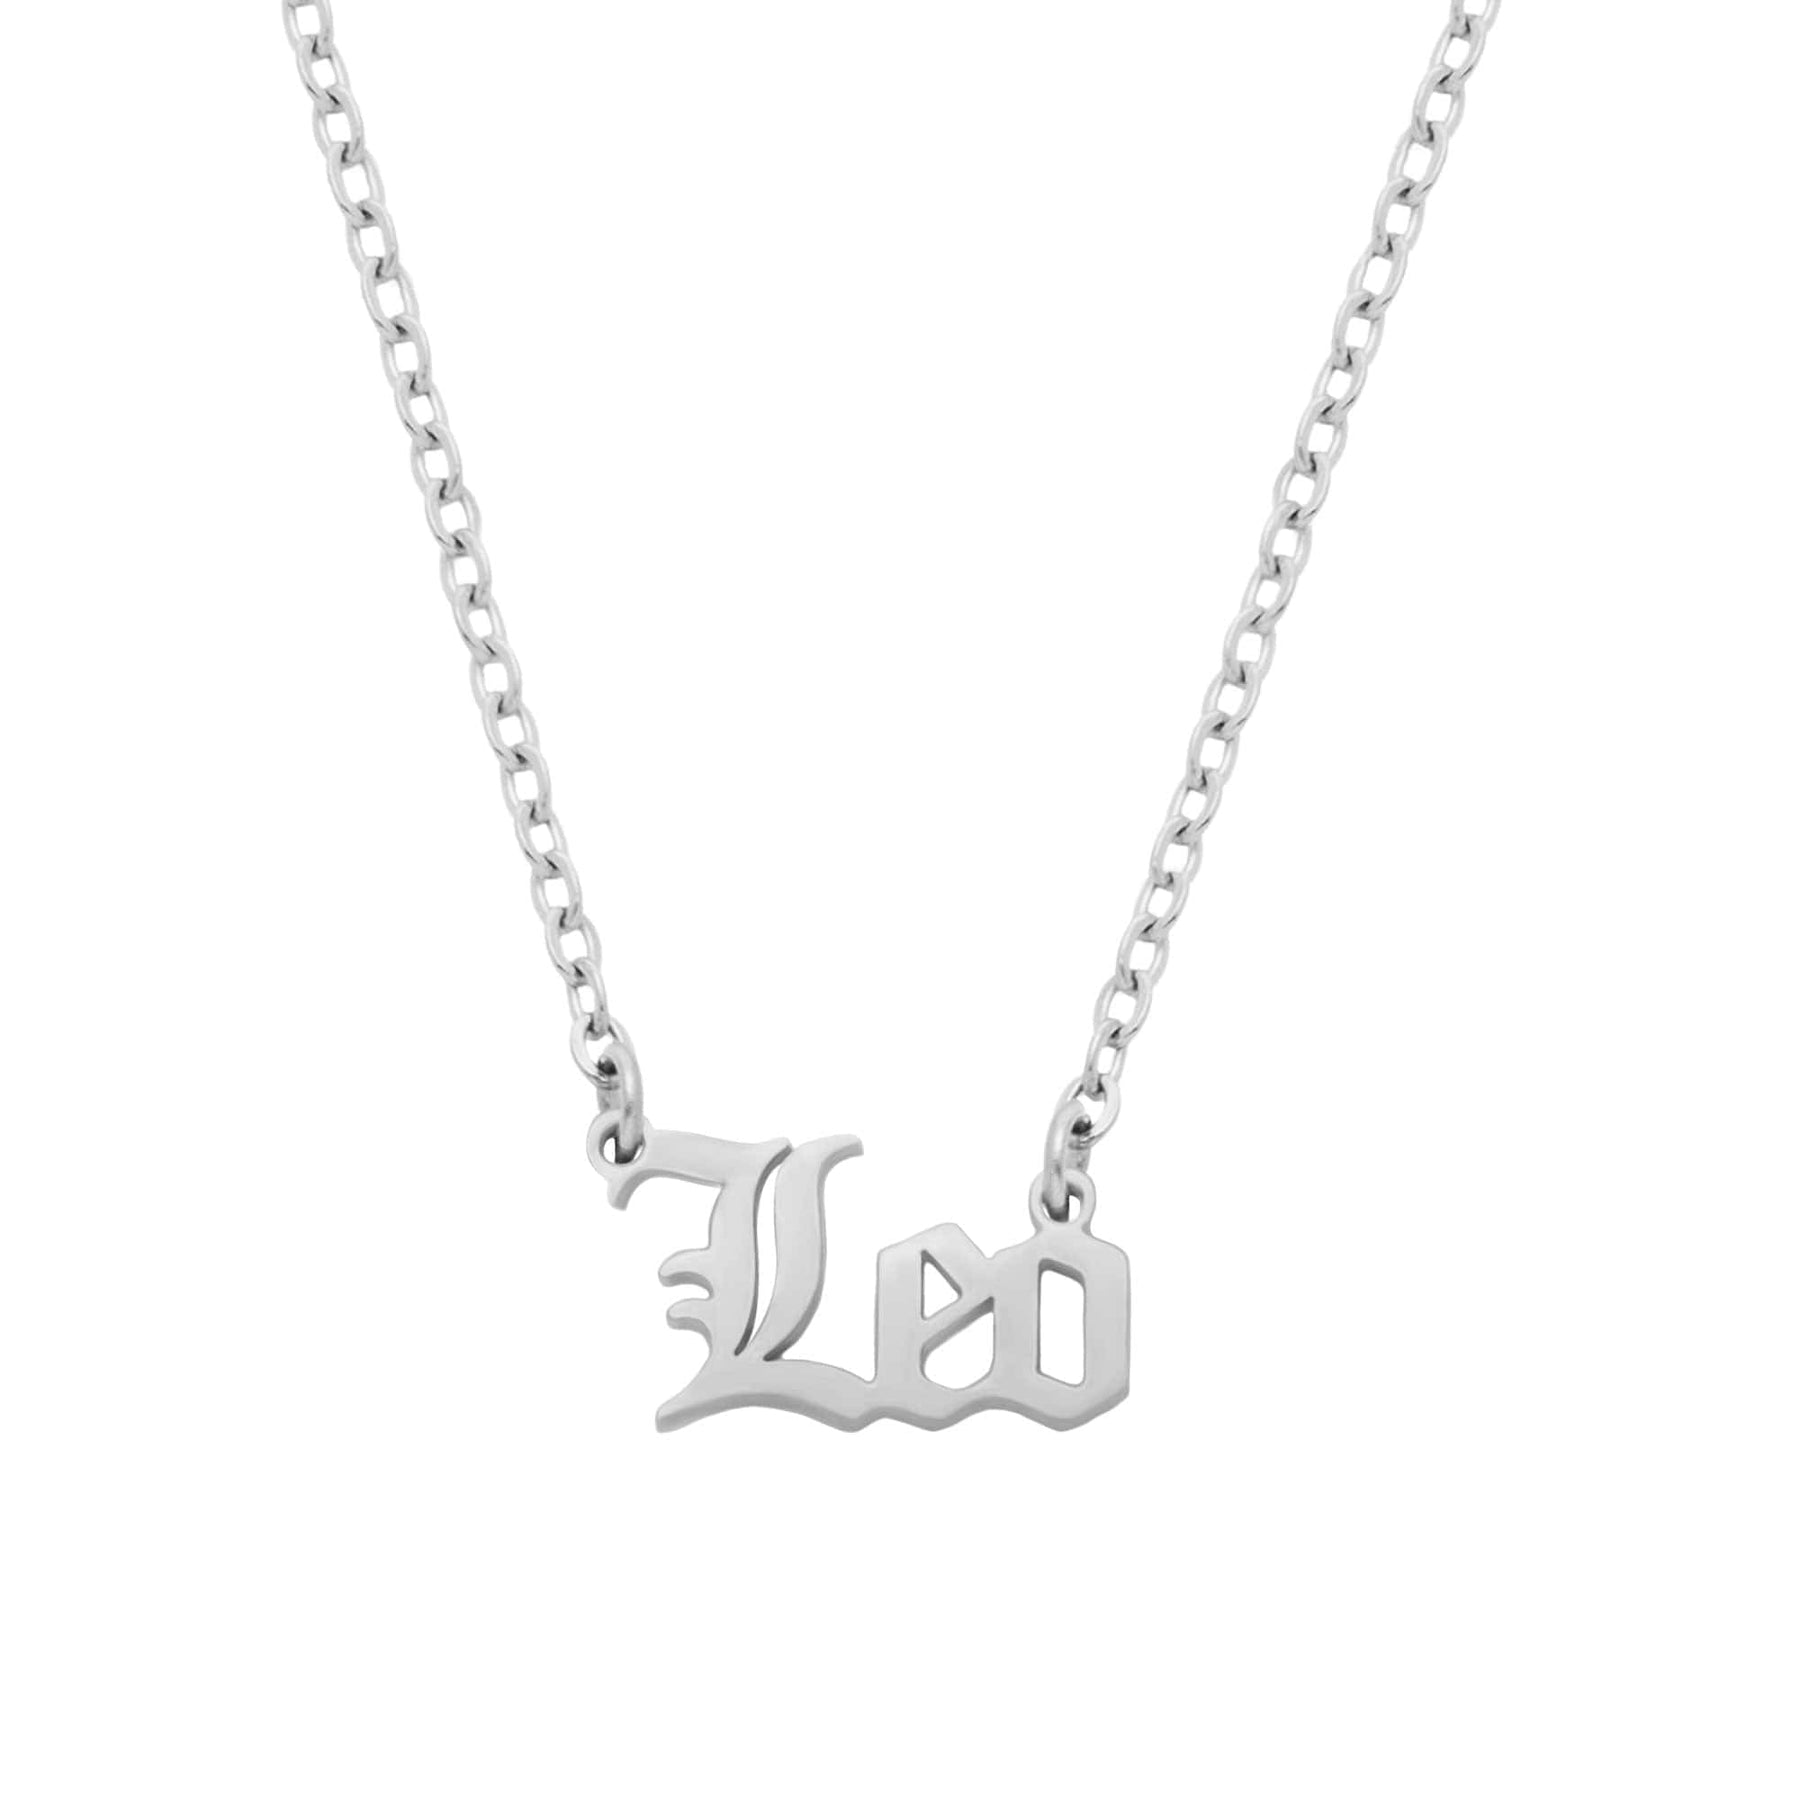 BohoMoon Stainless Steel Old English Zodiac Necklace Silver / Leo